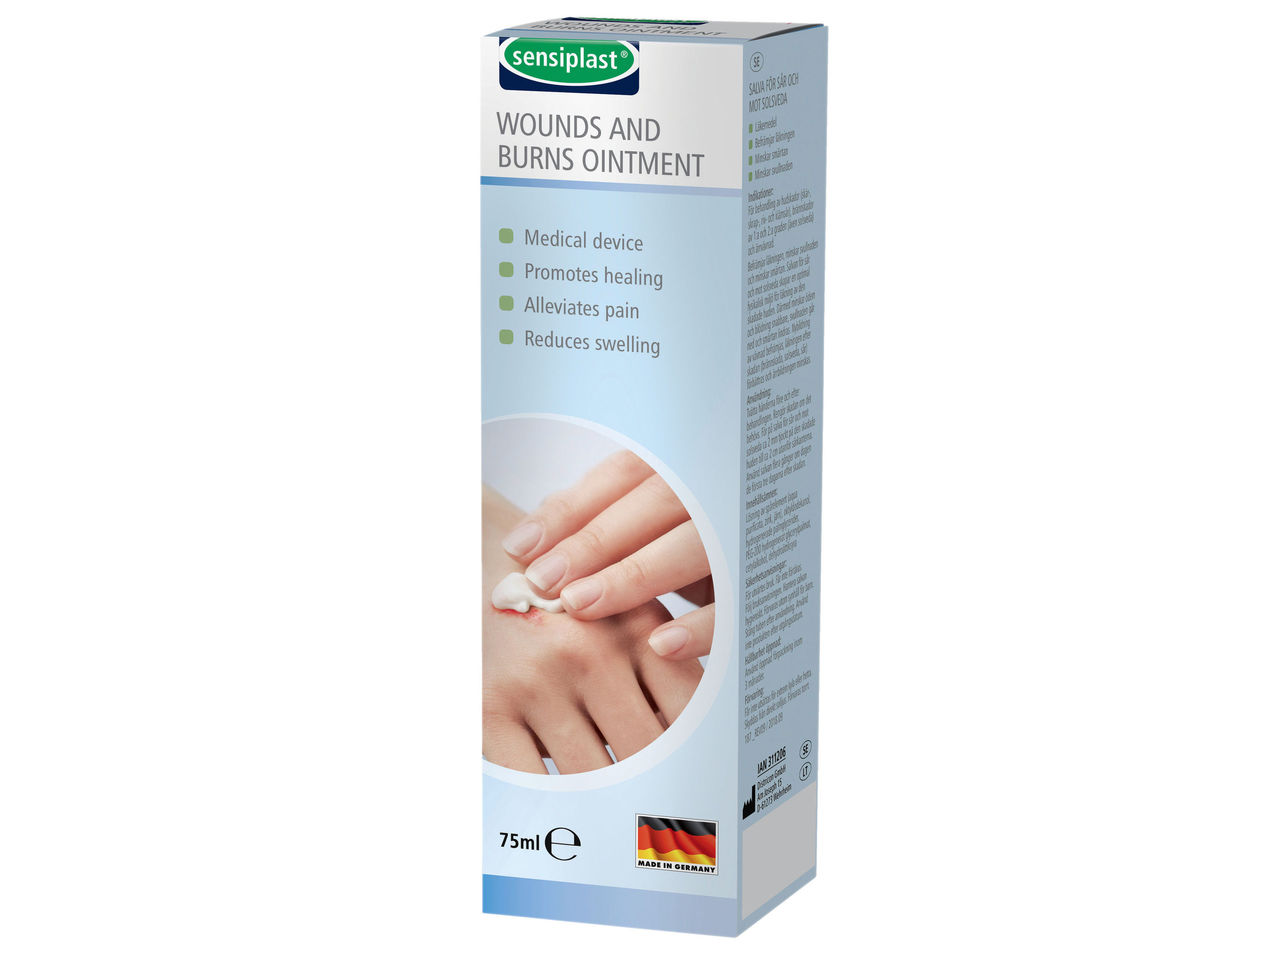 Haemostatic Spray for Wounds / Wounds & Burns Ointment / Dressing Spray